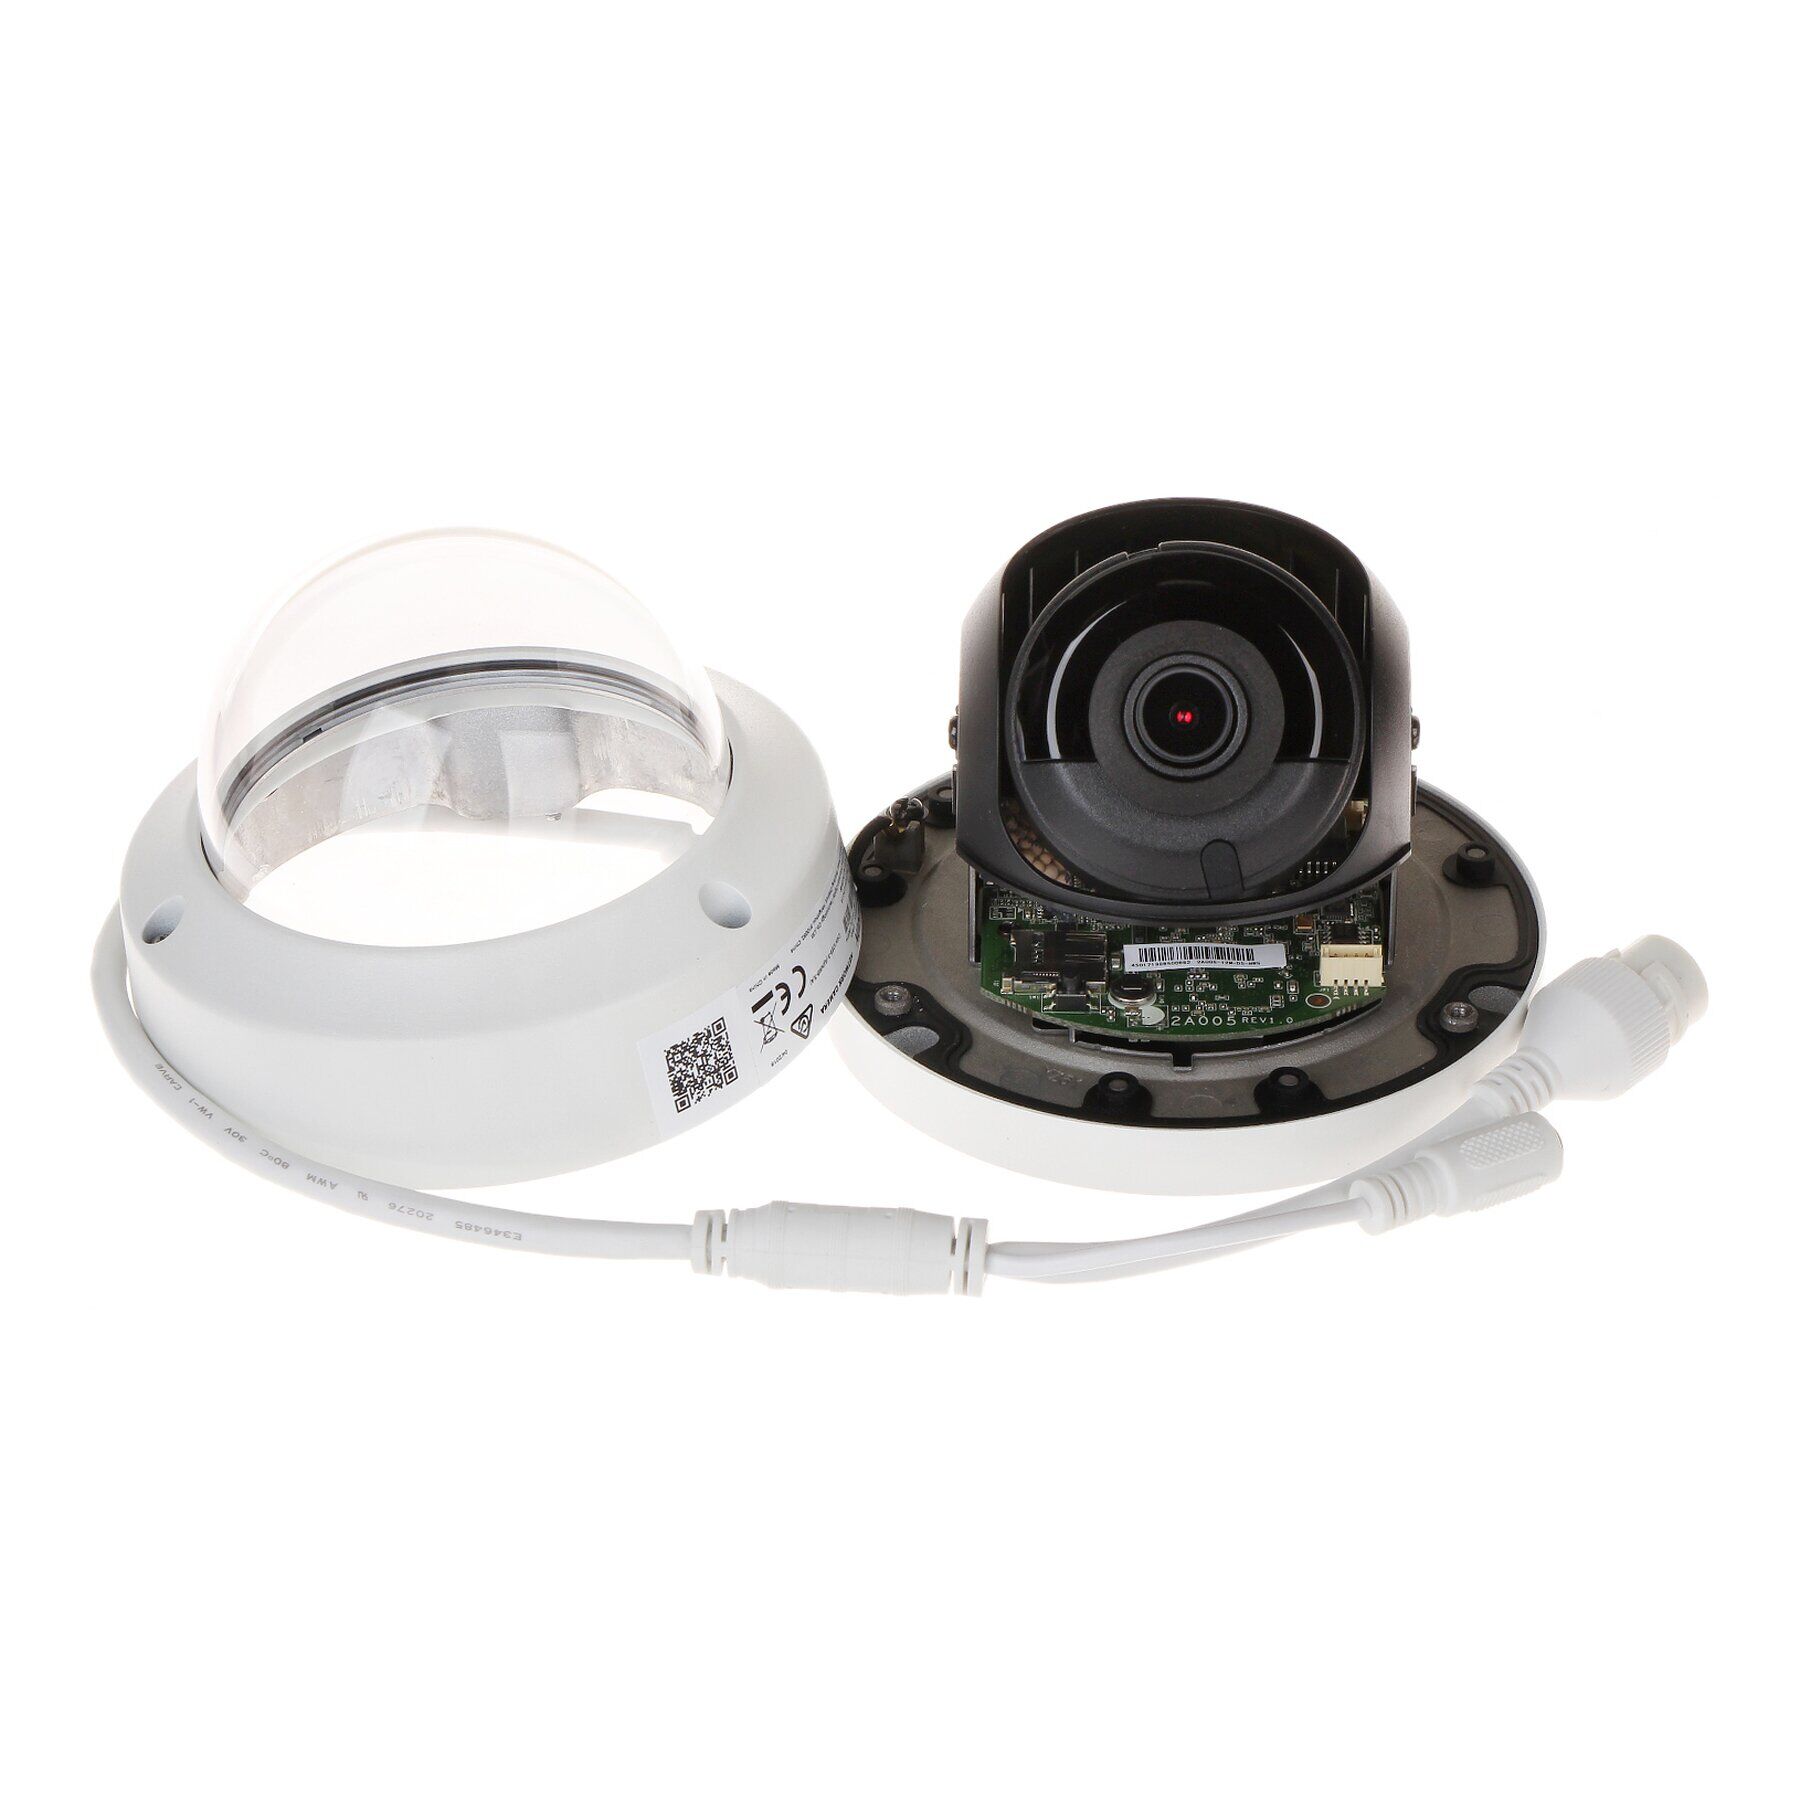 Камера ис. Hikvision DS-2cd2123g0-is. Hikvision DS-2cd2143g0-i. DS-2cd2143g0-is. Hikvision DS-2cd2123g0-is (2,8мм).